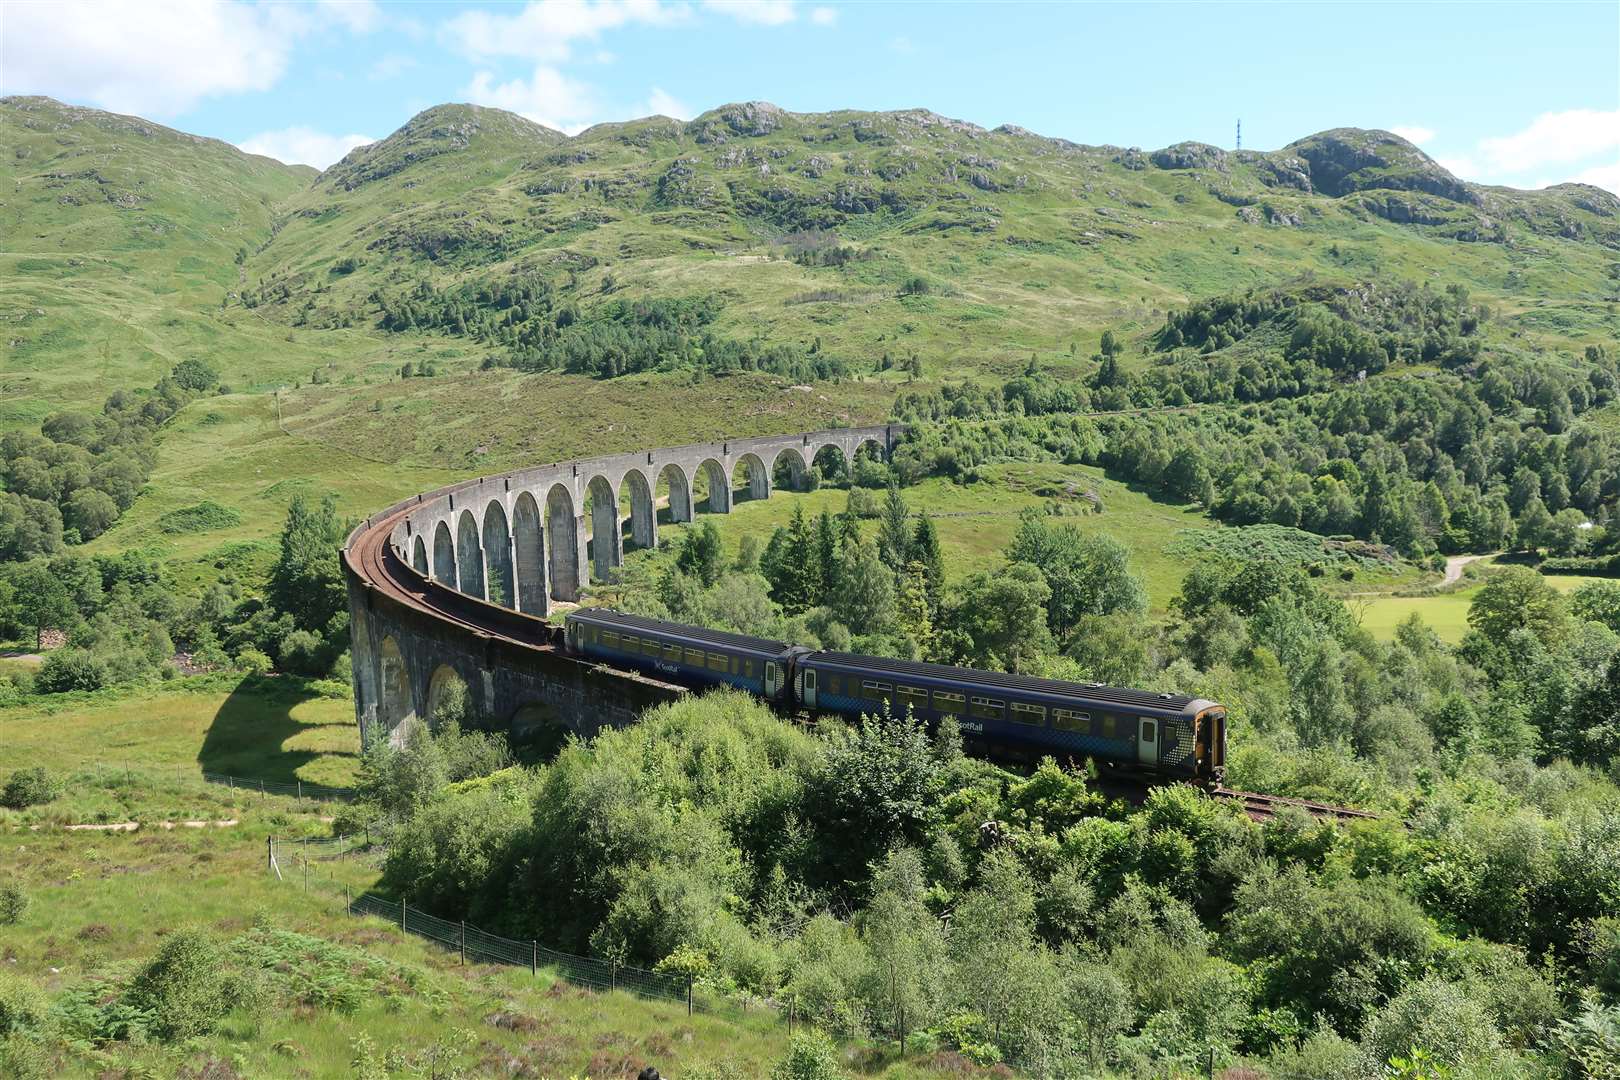 The ScotRail train passes over the viaduct..